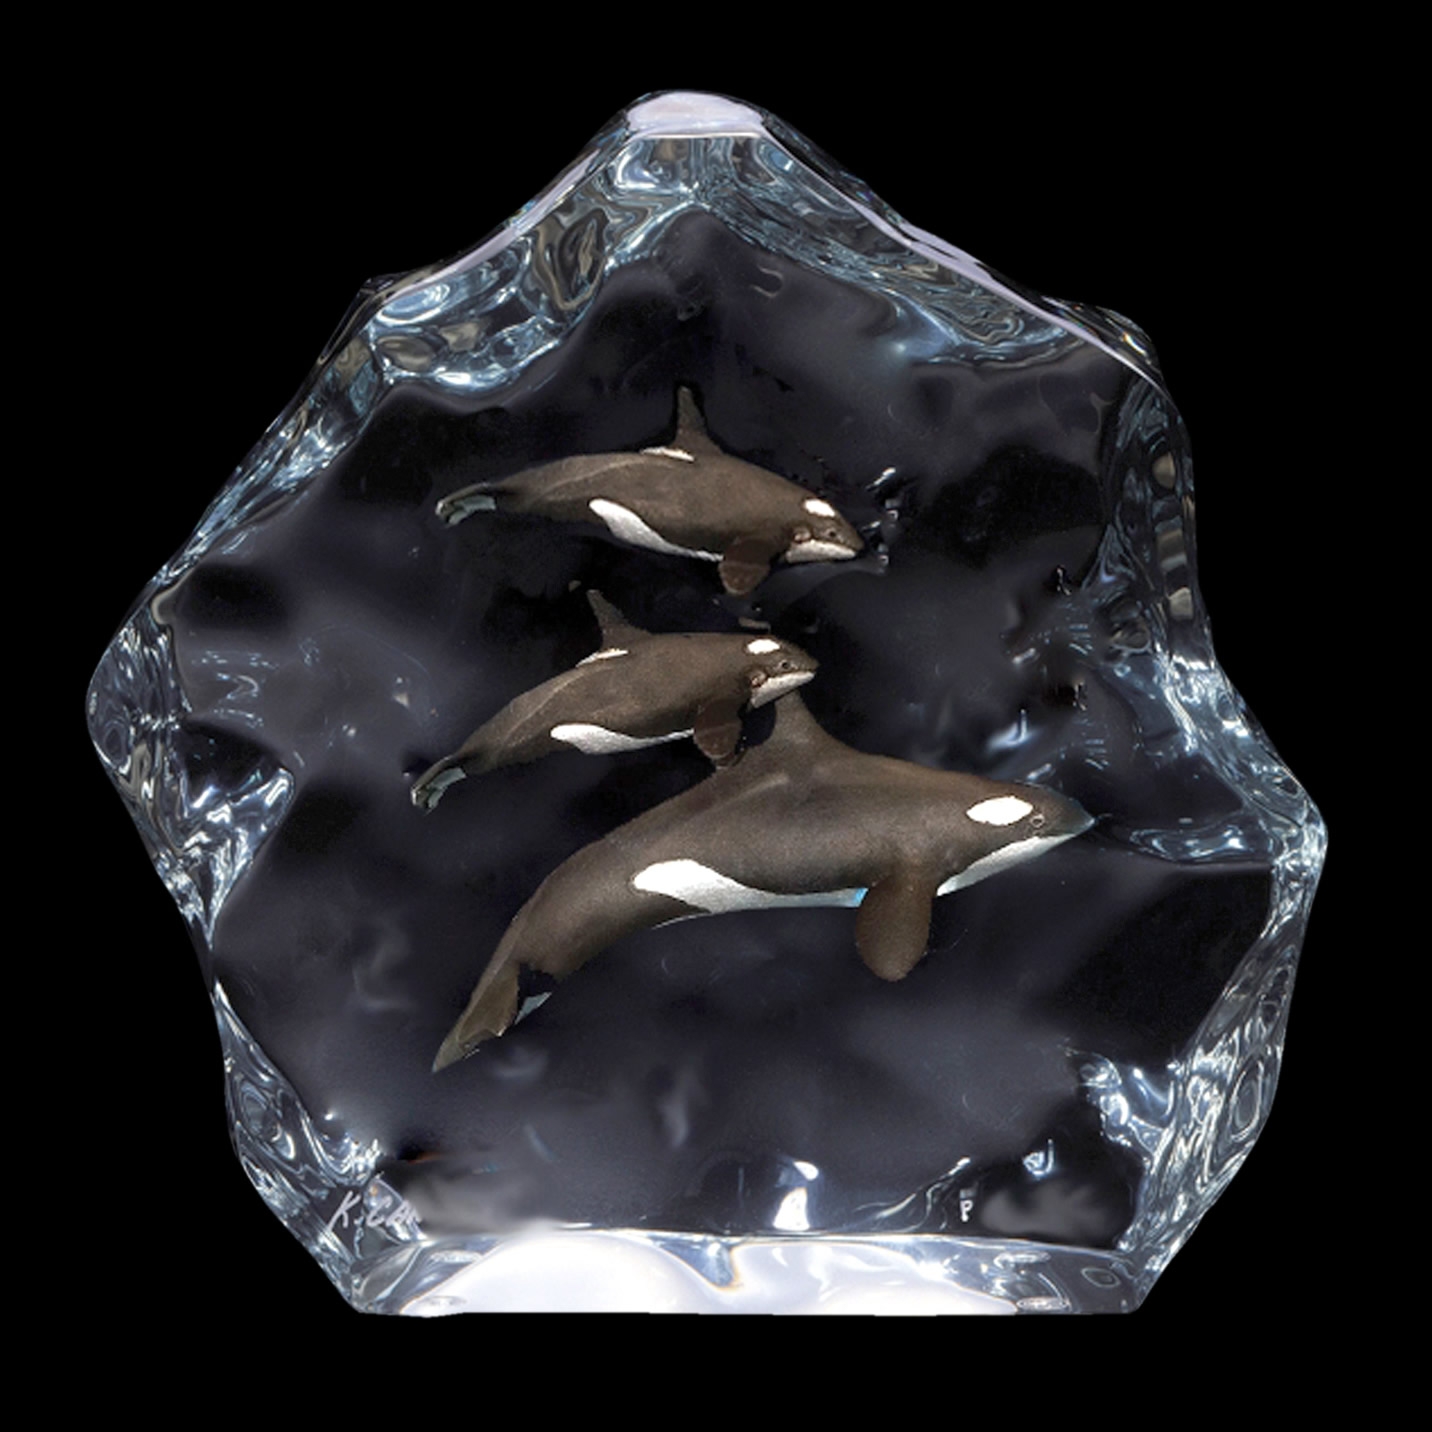 Northern Paradise Killer Whales Sculpture by Kitty Cantrell